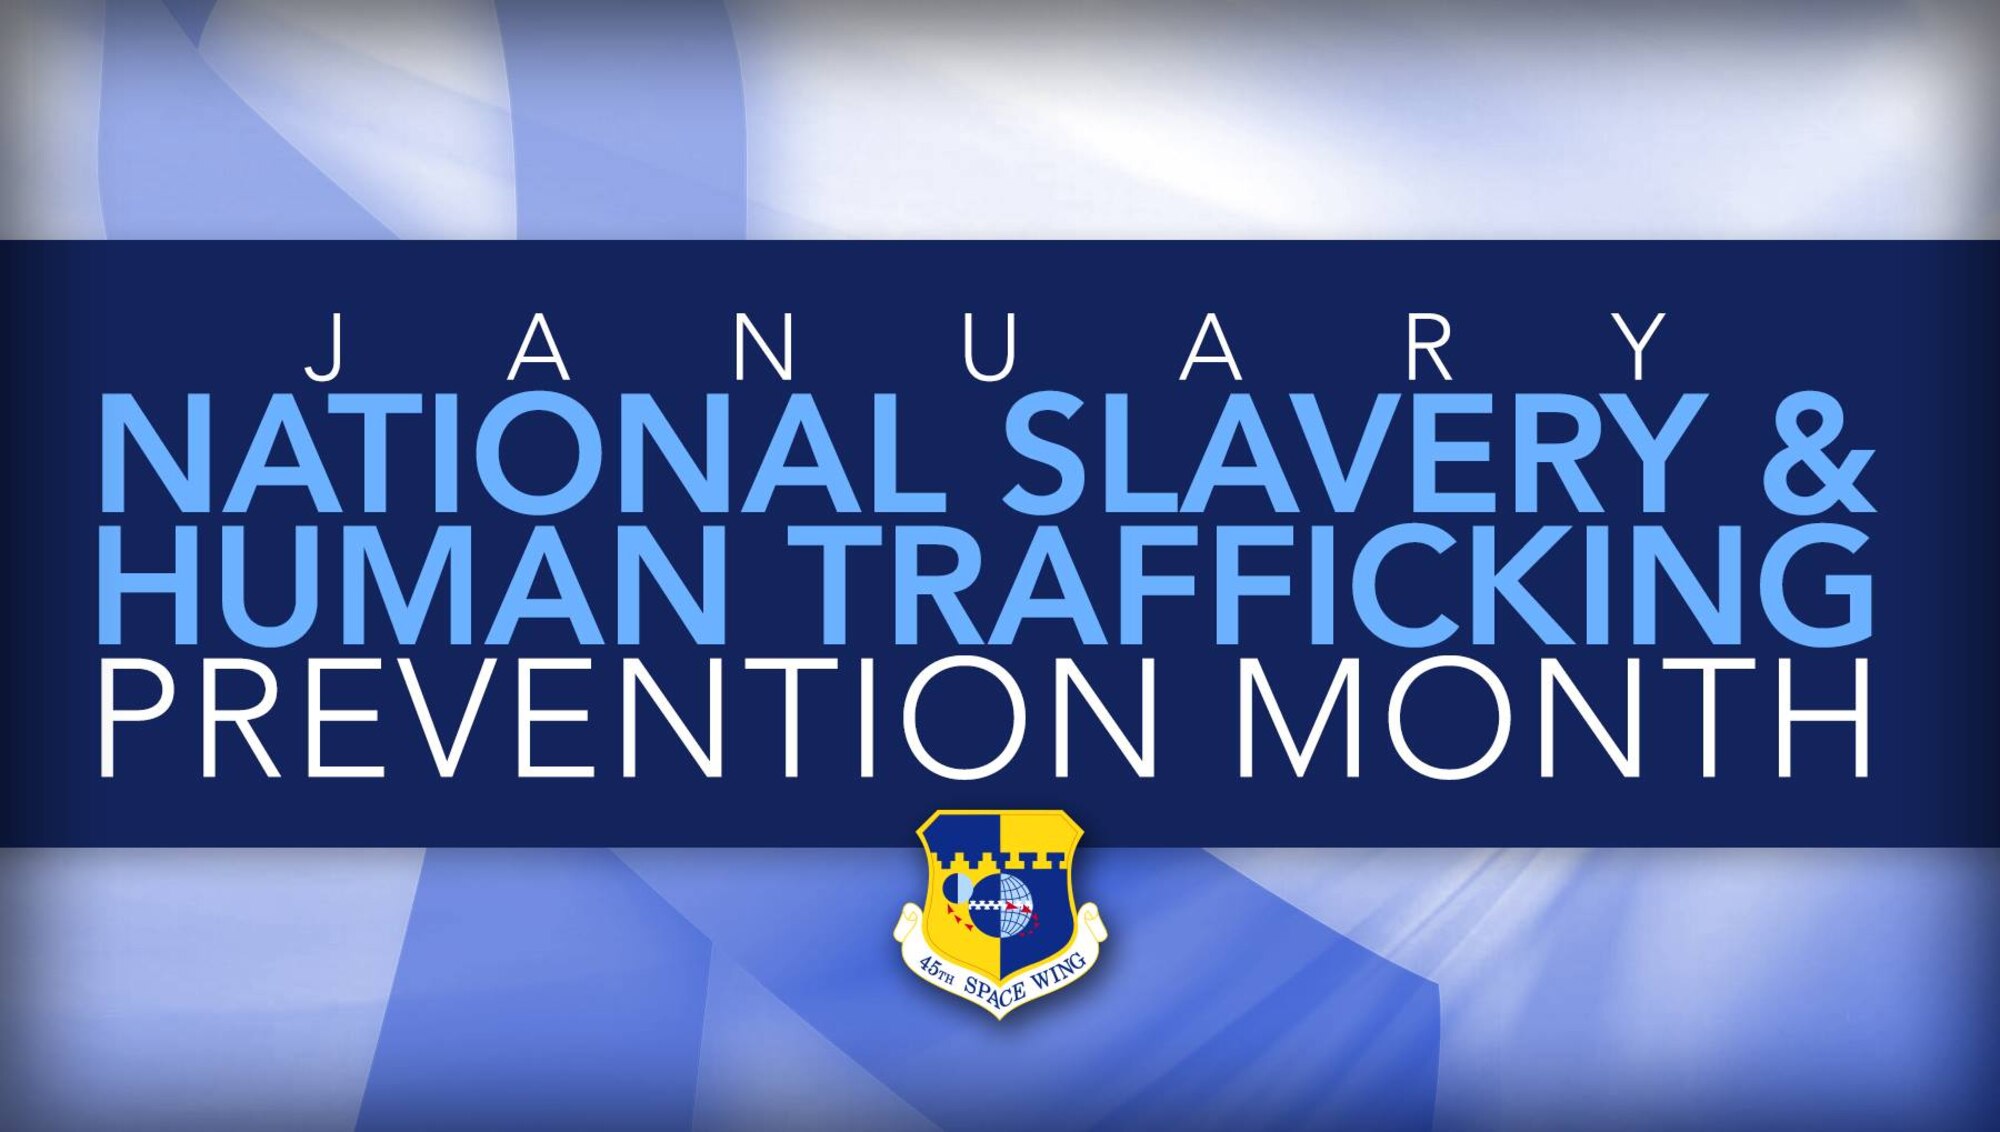 January is National Slavery and Human Trafficking Prevention Month.